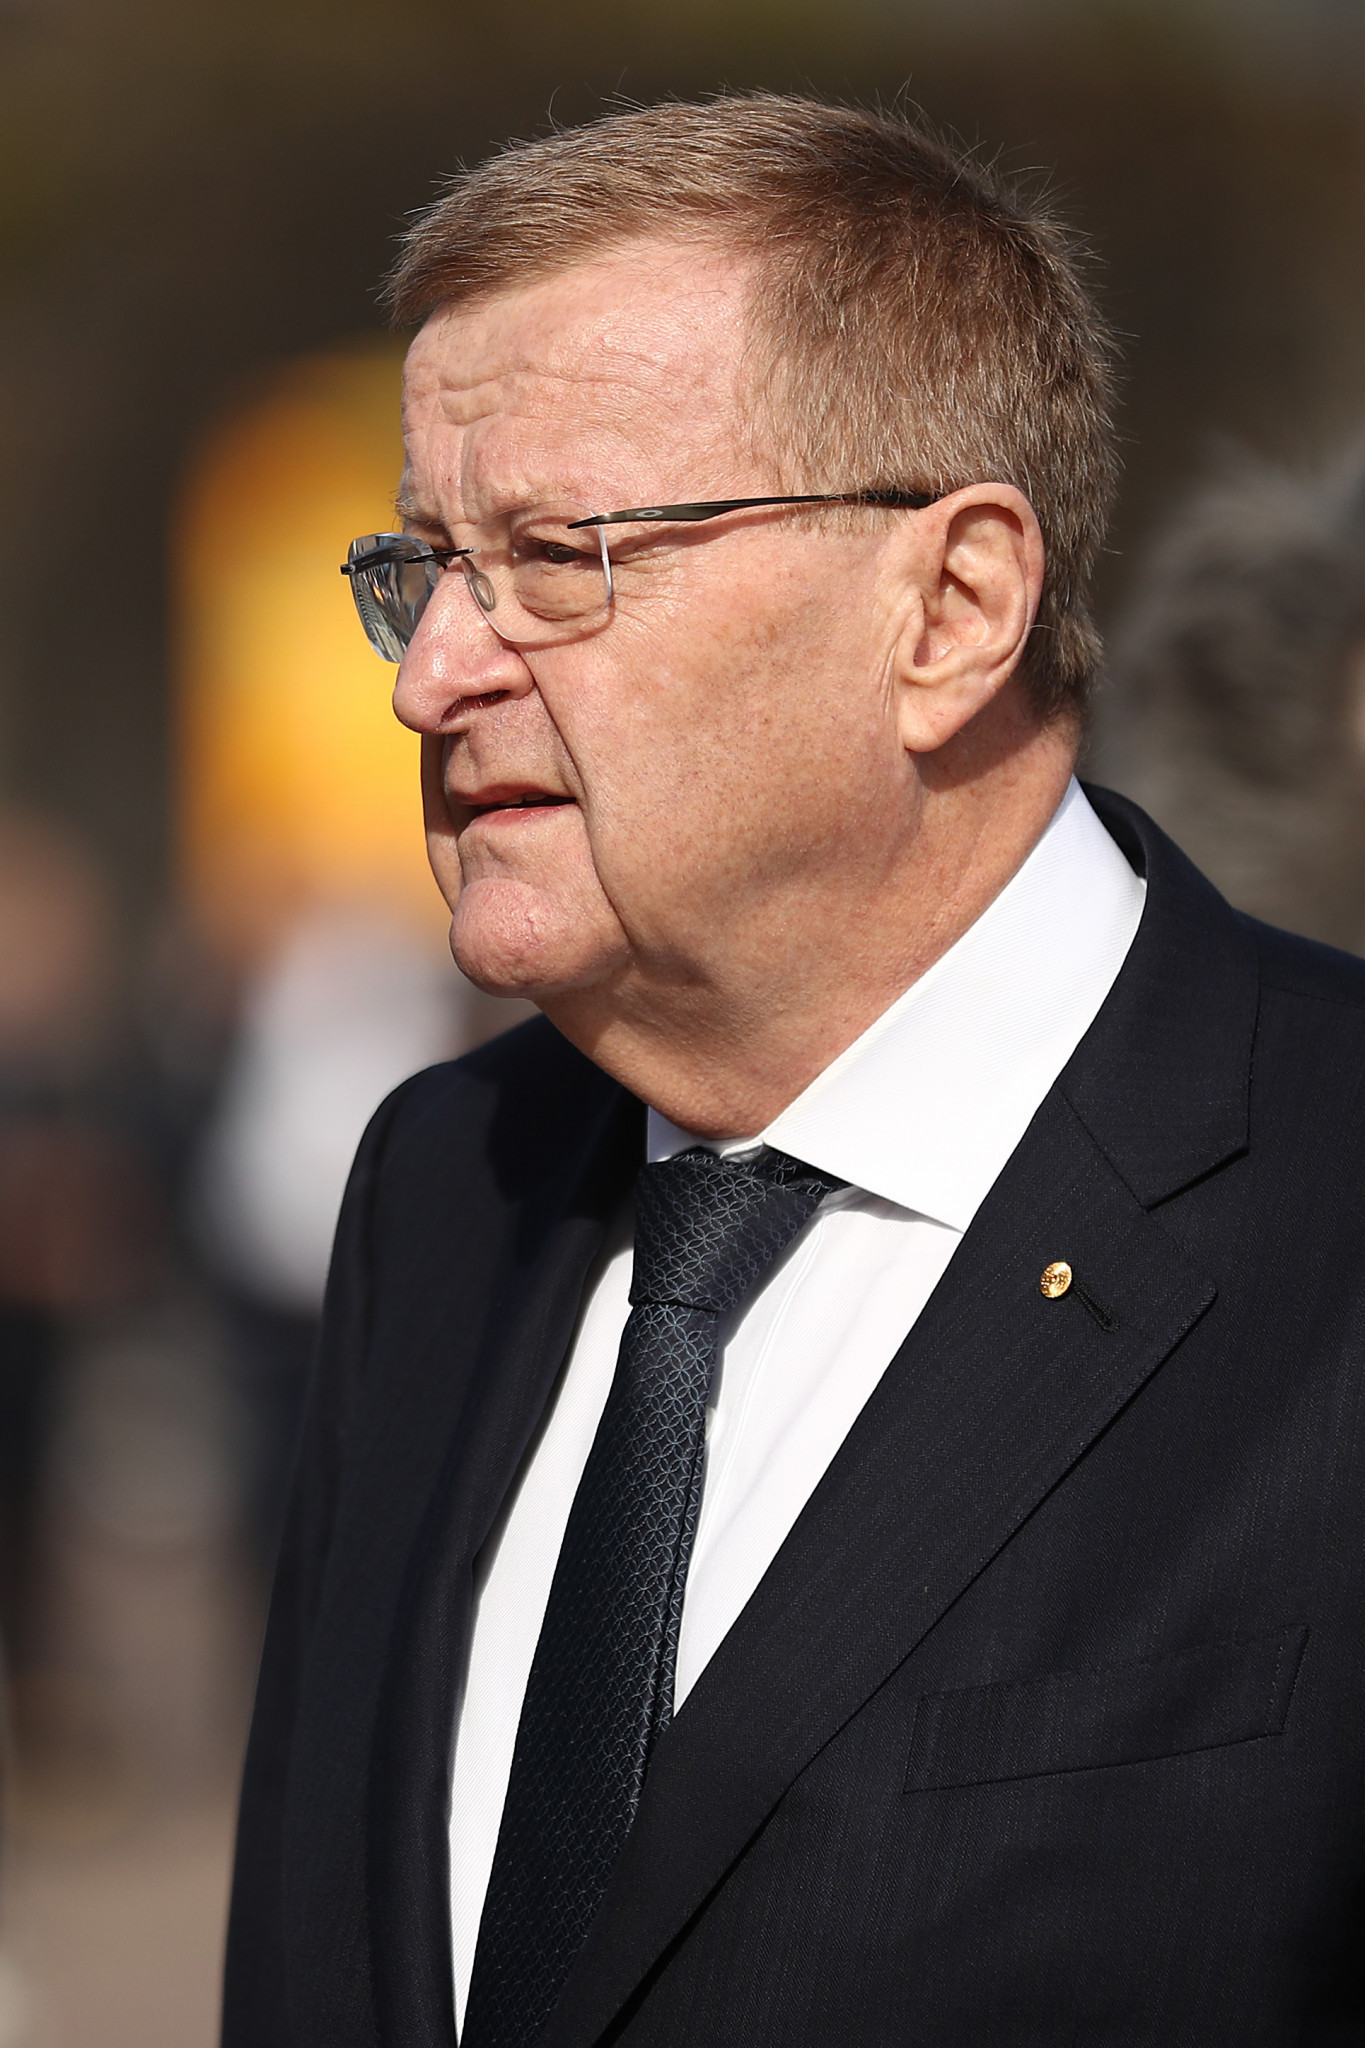 Australian Olympic Committee President John Coates offered his condolences to Nick Garratt's family and the rowing community he served for many decades ©Getty Images